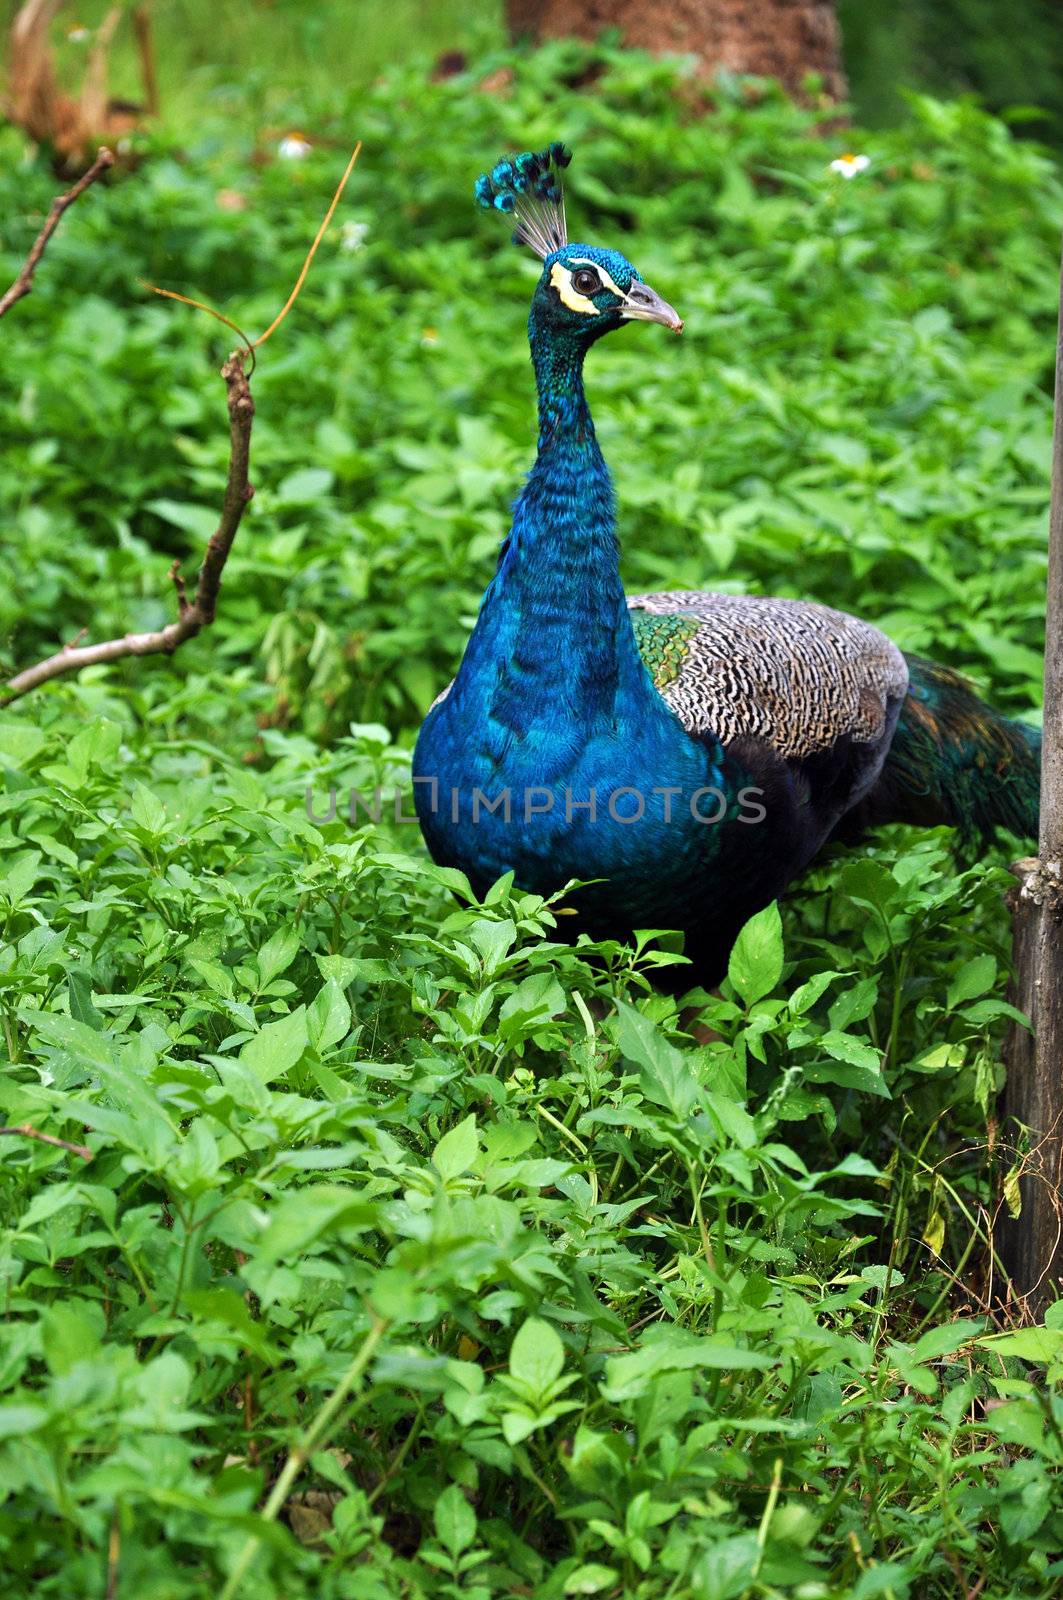 peafowl by MaZiKab